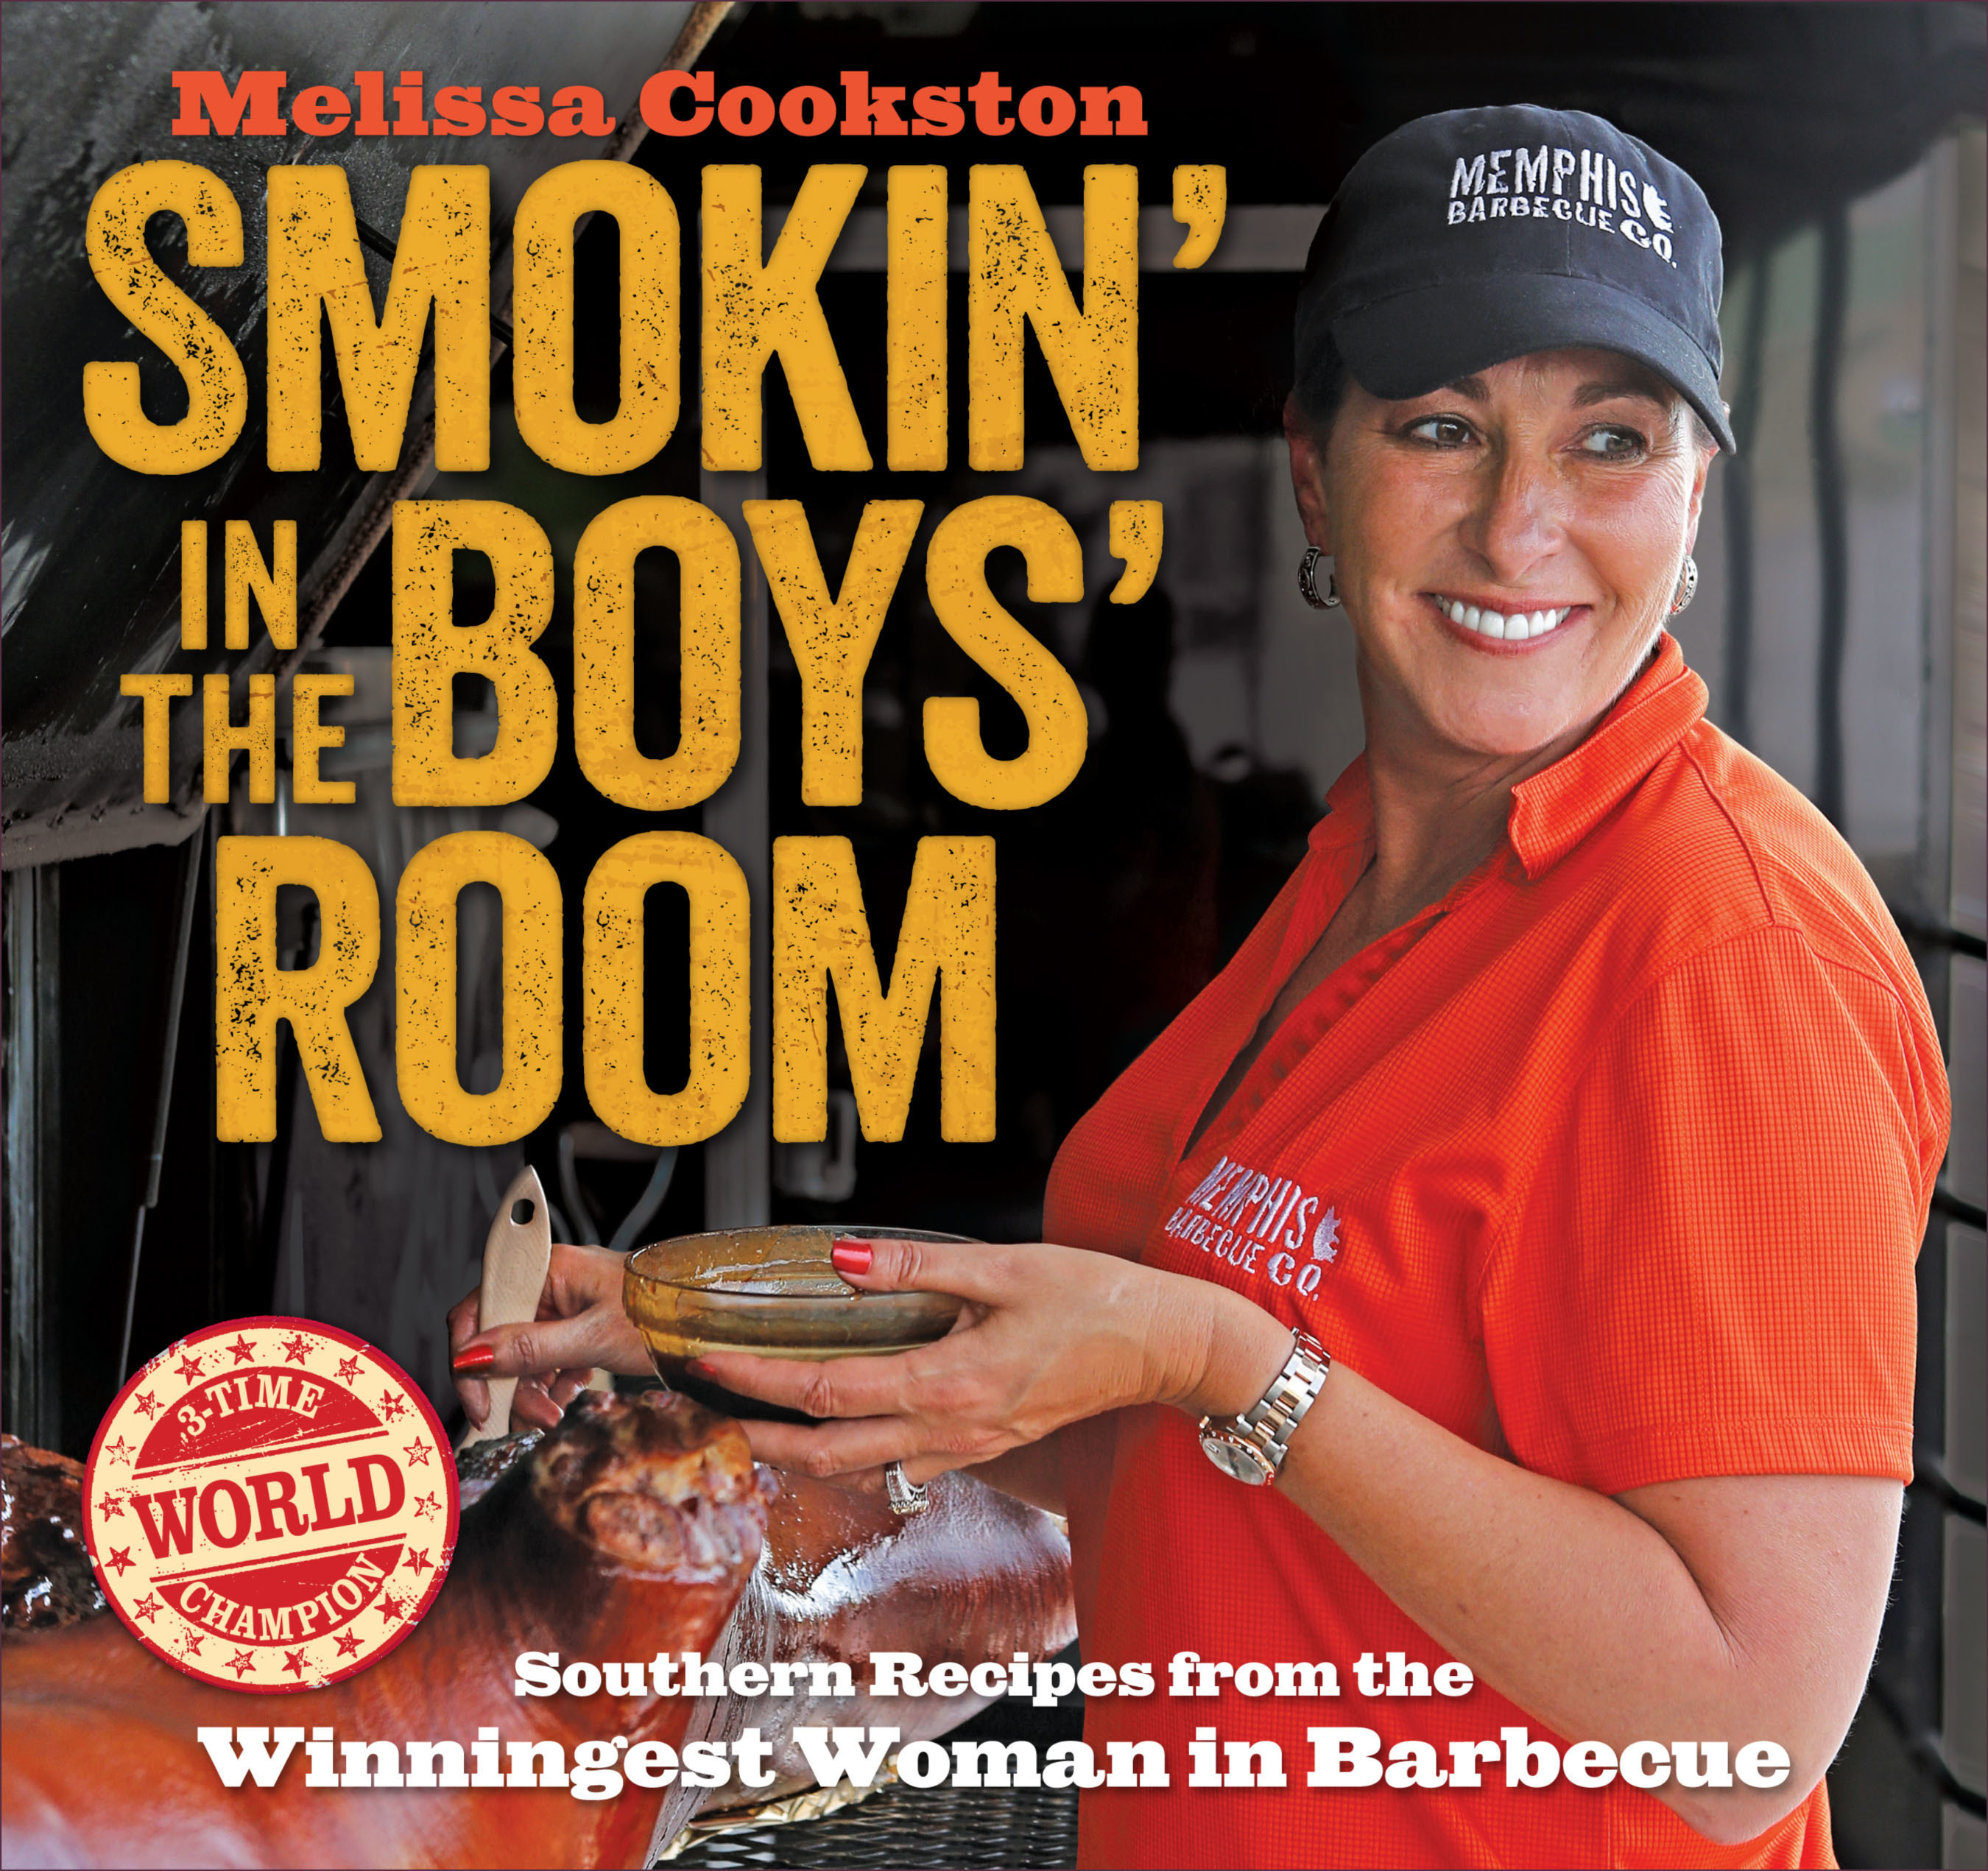 Melissa Cookston, the winningest woman in competition barbecue and owner of the country’s hottest barbecue restaurant group, Memphis BBQ Co., announces the release of her first cookbook, Smokin’ in the Boys Room: Southern Recipes from the Winningest Woman in Barbecue (Andrews McMeel Publishing, LLC, $22.99, April 2014). Cookston is a two-time Memphis in May Grand Champion and a three-time winner of the Whole Hog Championship. She is the owner of Memphis Barbecue Co. restaurants in Horn Lake, MS; Fayetteville, NC; and Dunwoody, GA; and has appeared on Destination America’s BBQ Pitmasters; Food Network’s Diners, Drive-ins, and Dives; and ABC’s The Chew. (PRNewsFoto/Memphis BBQ Co.)